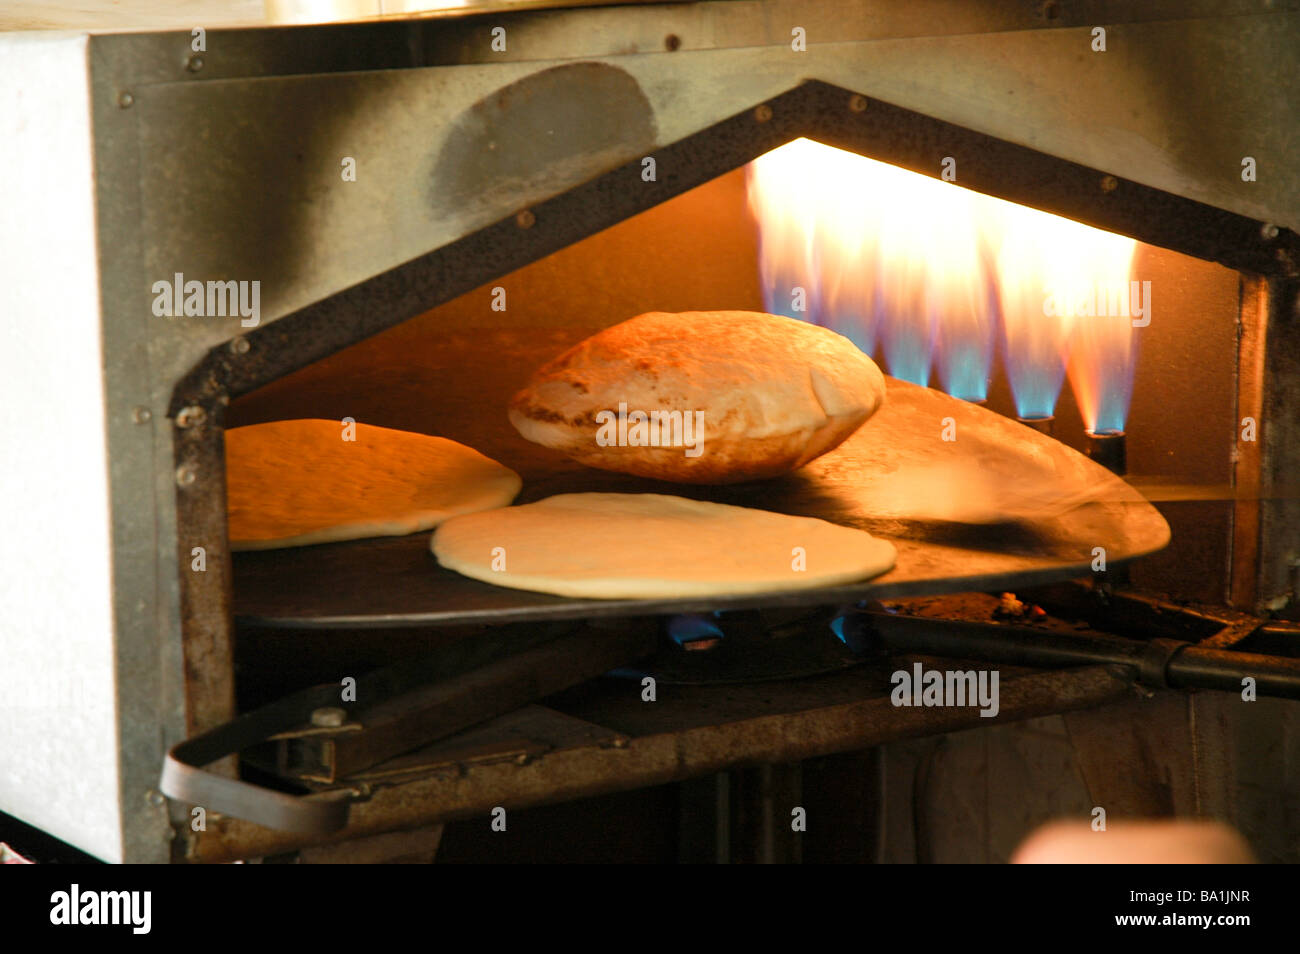 A Pitta Bread Oven At The Old City Of Jerusalem Stock Photo, Picture and  Royalty Free Image. Image 18180273.